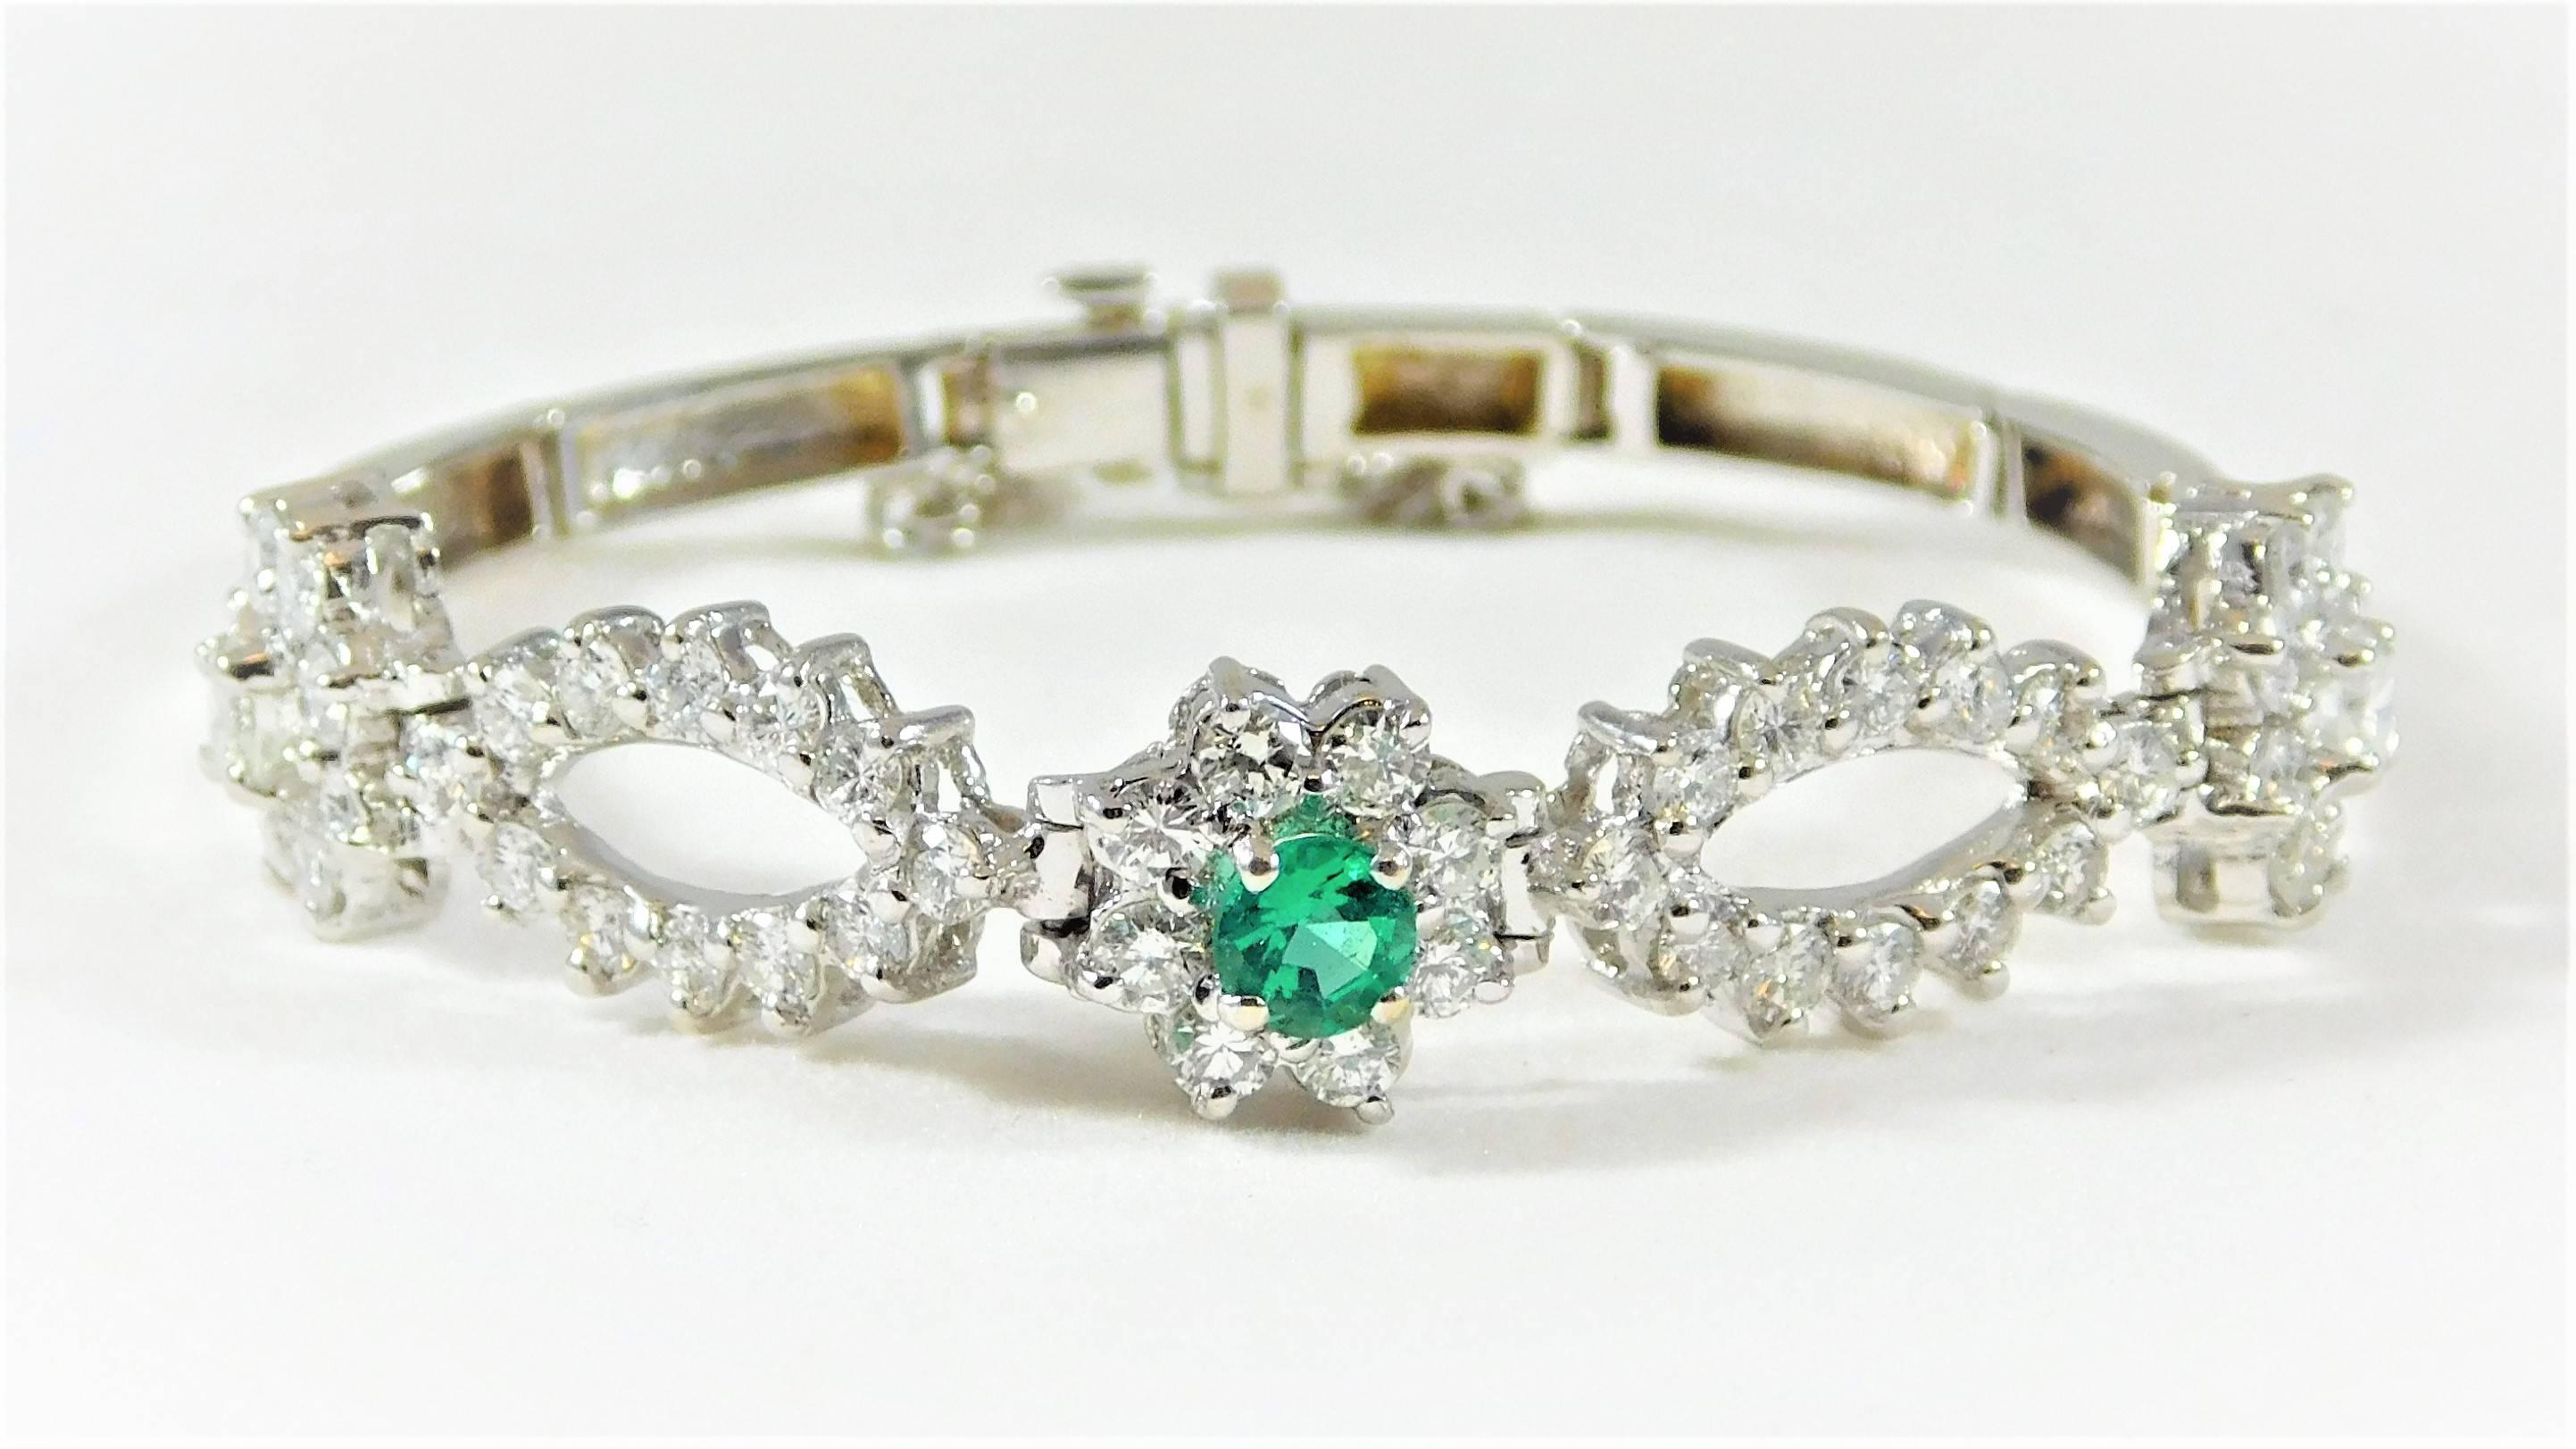 
Circa 1940.  This dazzling bracelet is made of solid 14k white gold.  It is masterfully jeweled with 50 immaculate round brilliant-cut diamonds totaling an approximate 2.50ct.  All of these diamonds are H color and VS1 clarity and alternate between